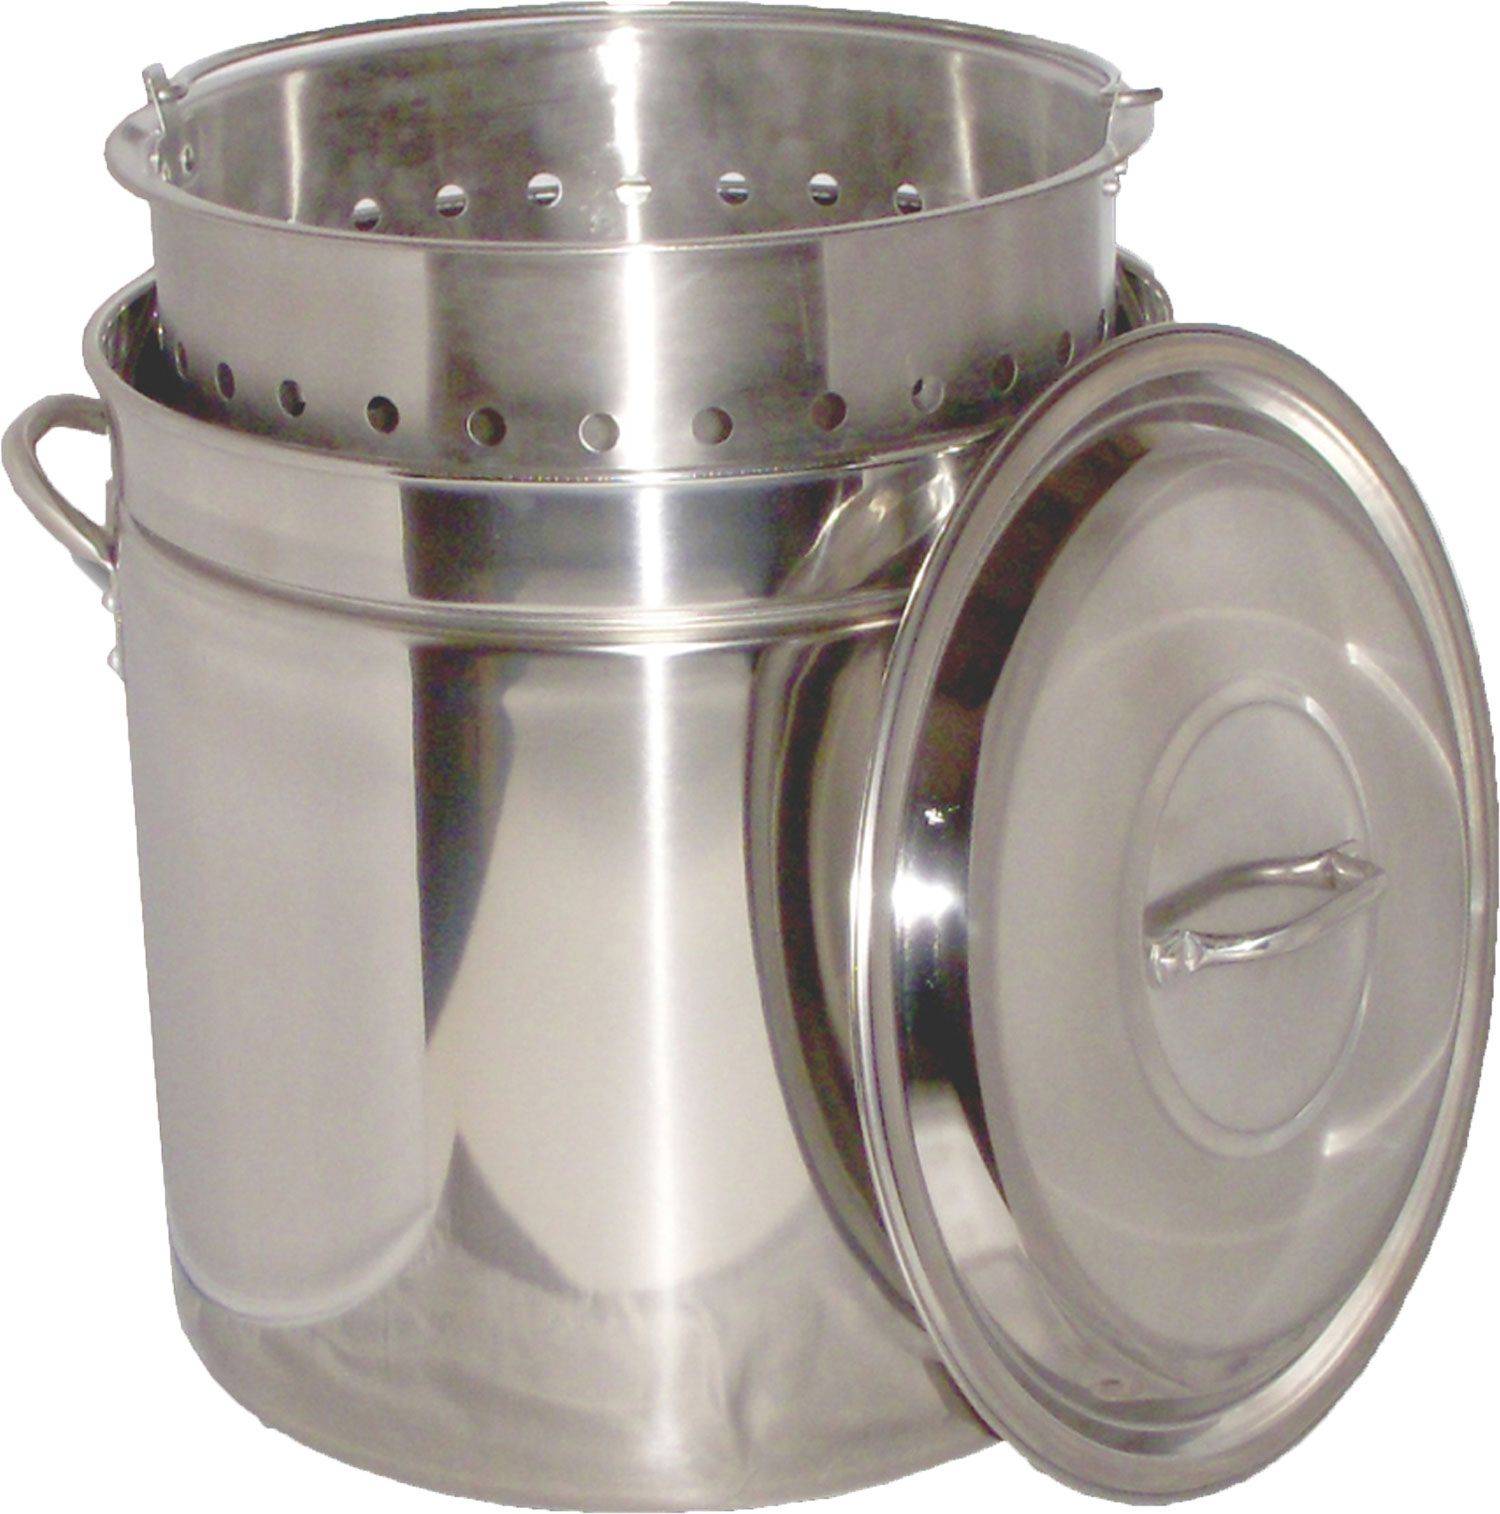 King Kooker 62 Quart Stainless Steel Camp Boiling Pot with Steam Rim